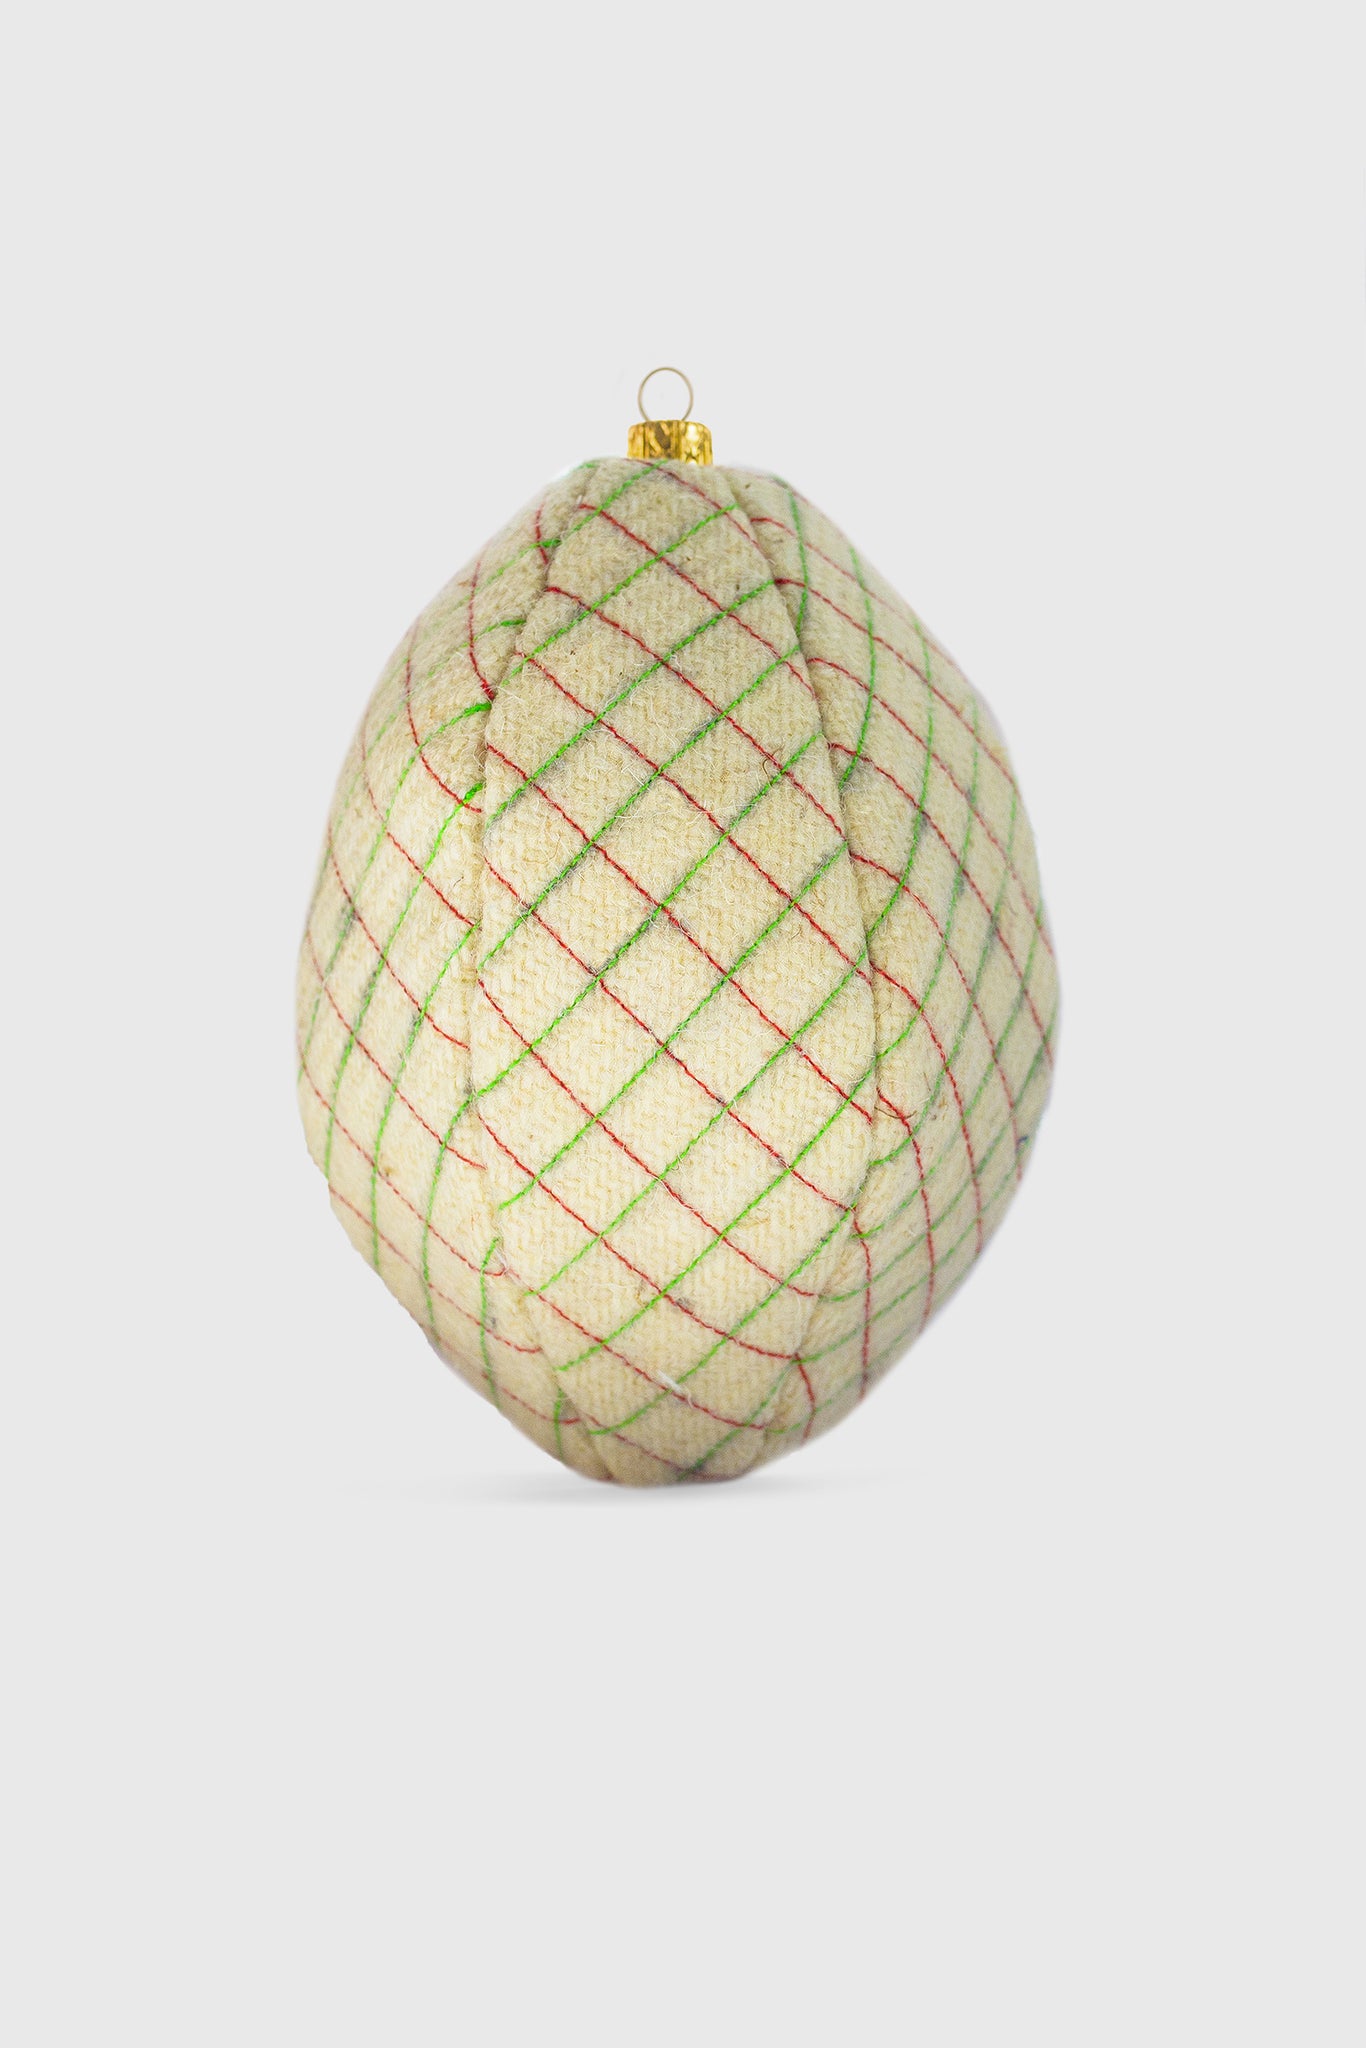 Ruxandra oval Christmas tree ornament, embroidered with lines, grid style, green and red on white wool, charming, classic Christmas shape, coca cola commercial ornaments